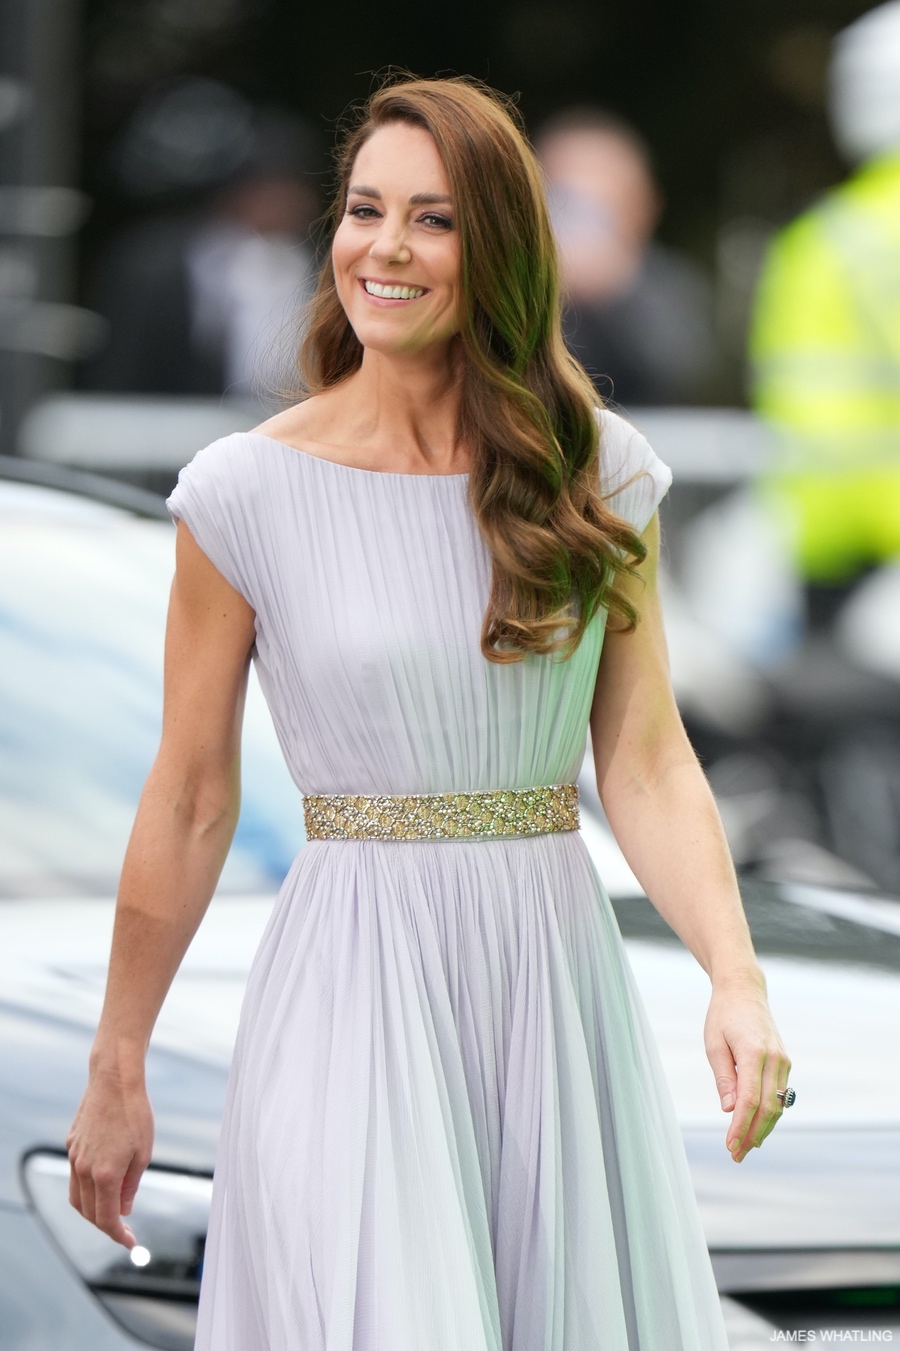 Kate Middleton wearing a lilac gown by Alexander McQueen to the Earthshot Awards.